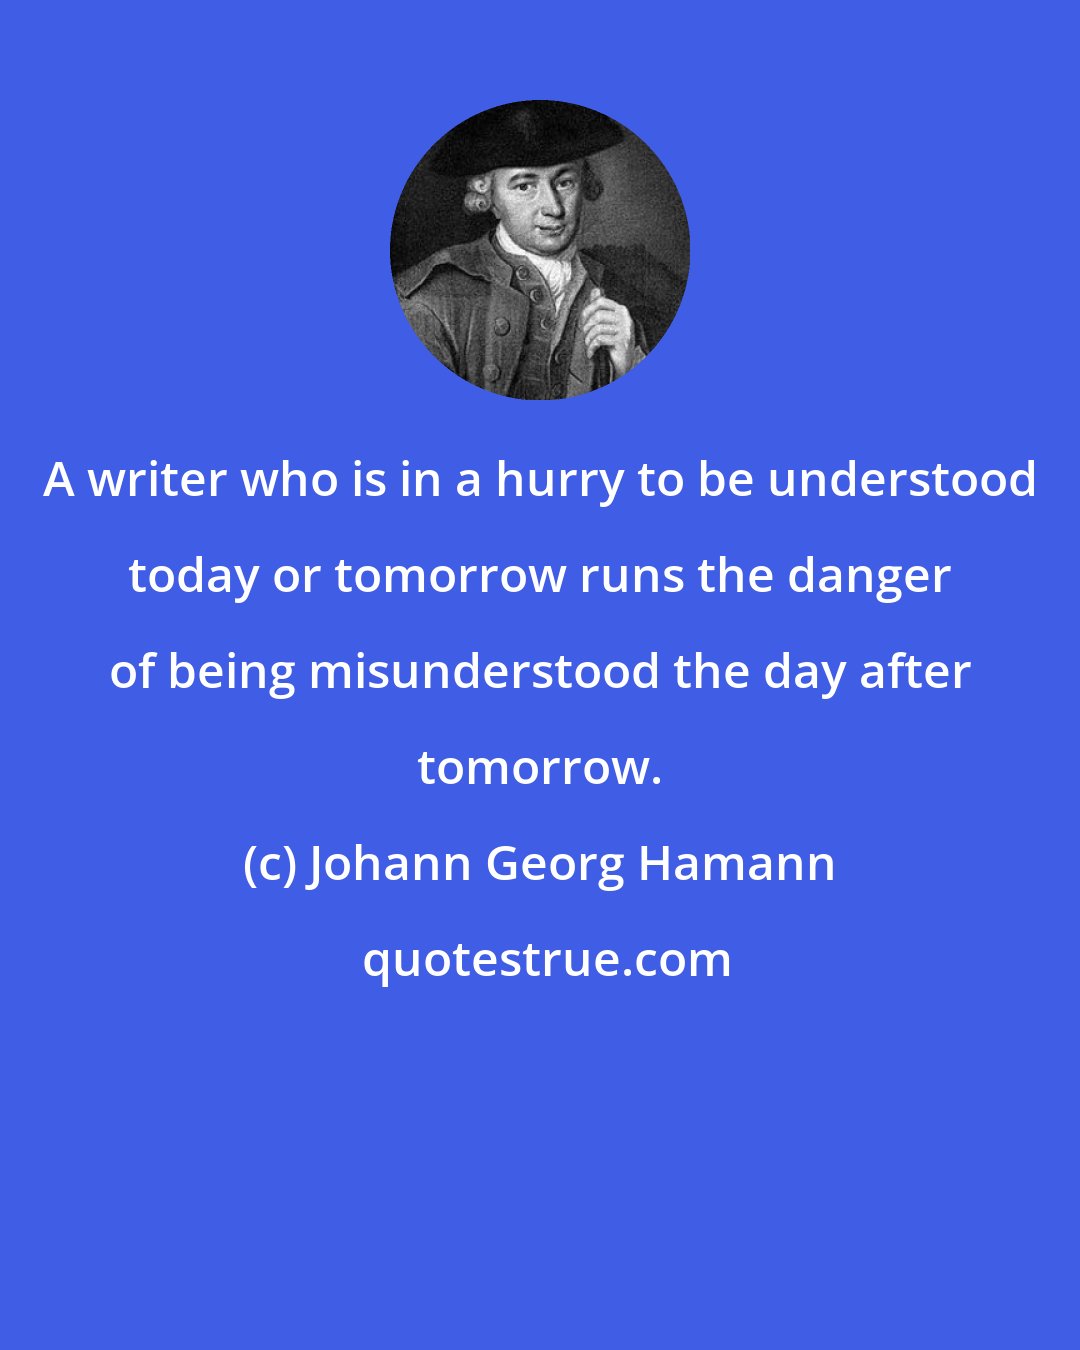 Johann Georg Hamann: A writer who is in a hurry to be understood today or tomorrow runs the danger of being misunderstood the day after tomorrow.